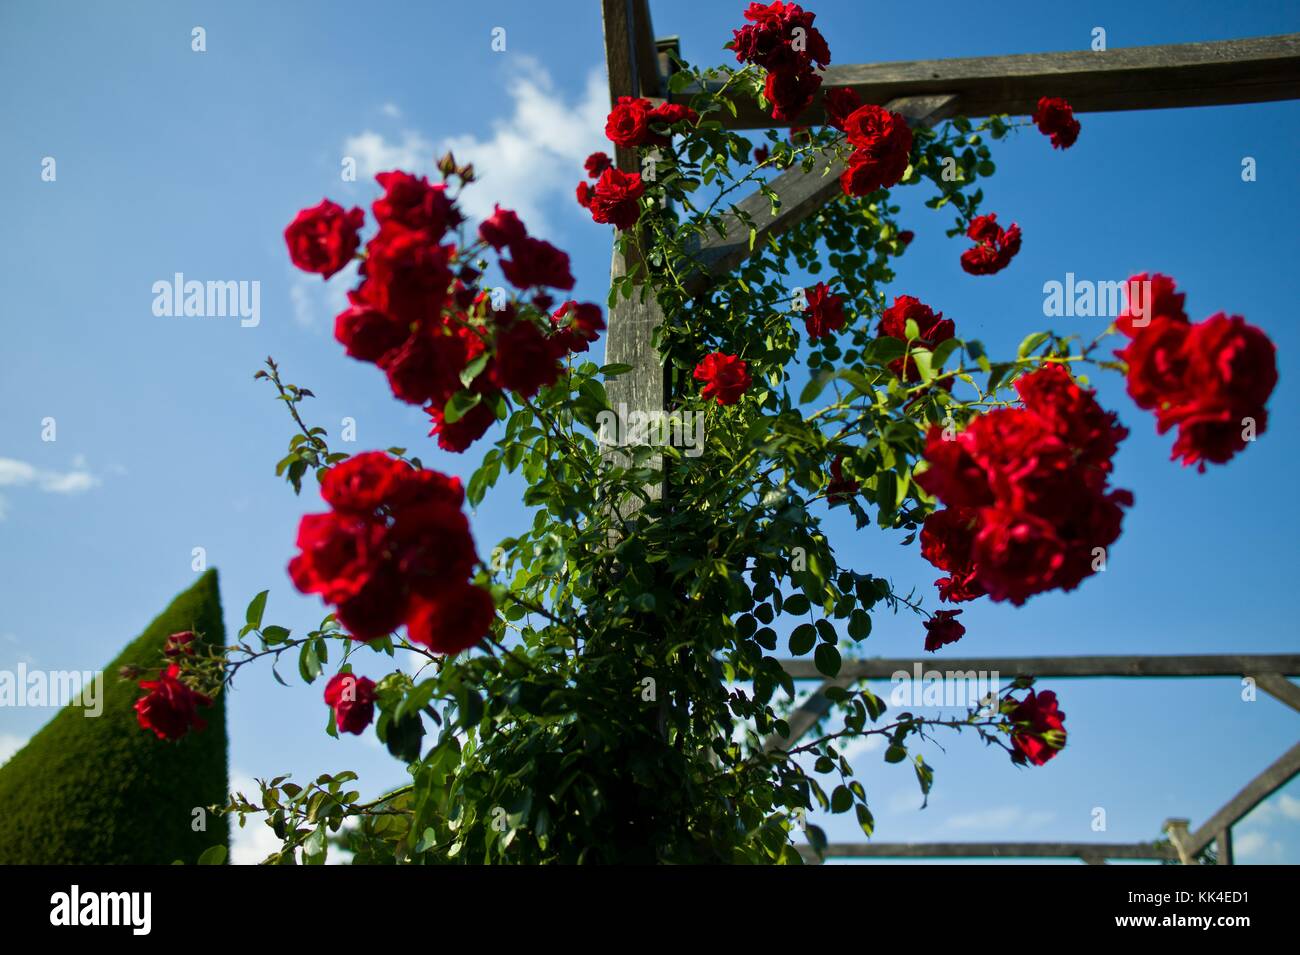 The tree and its neighbors. -  04/06/2011  -    -  A wonderful red rosebush on the blue sky.   -  Sylvain Leser / Le Pictorium Stock Photo